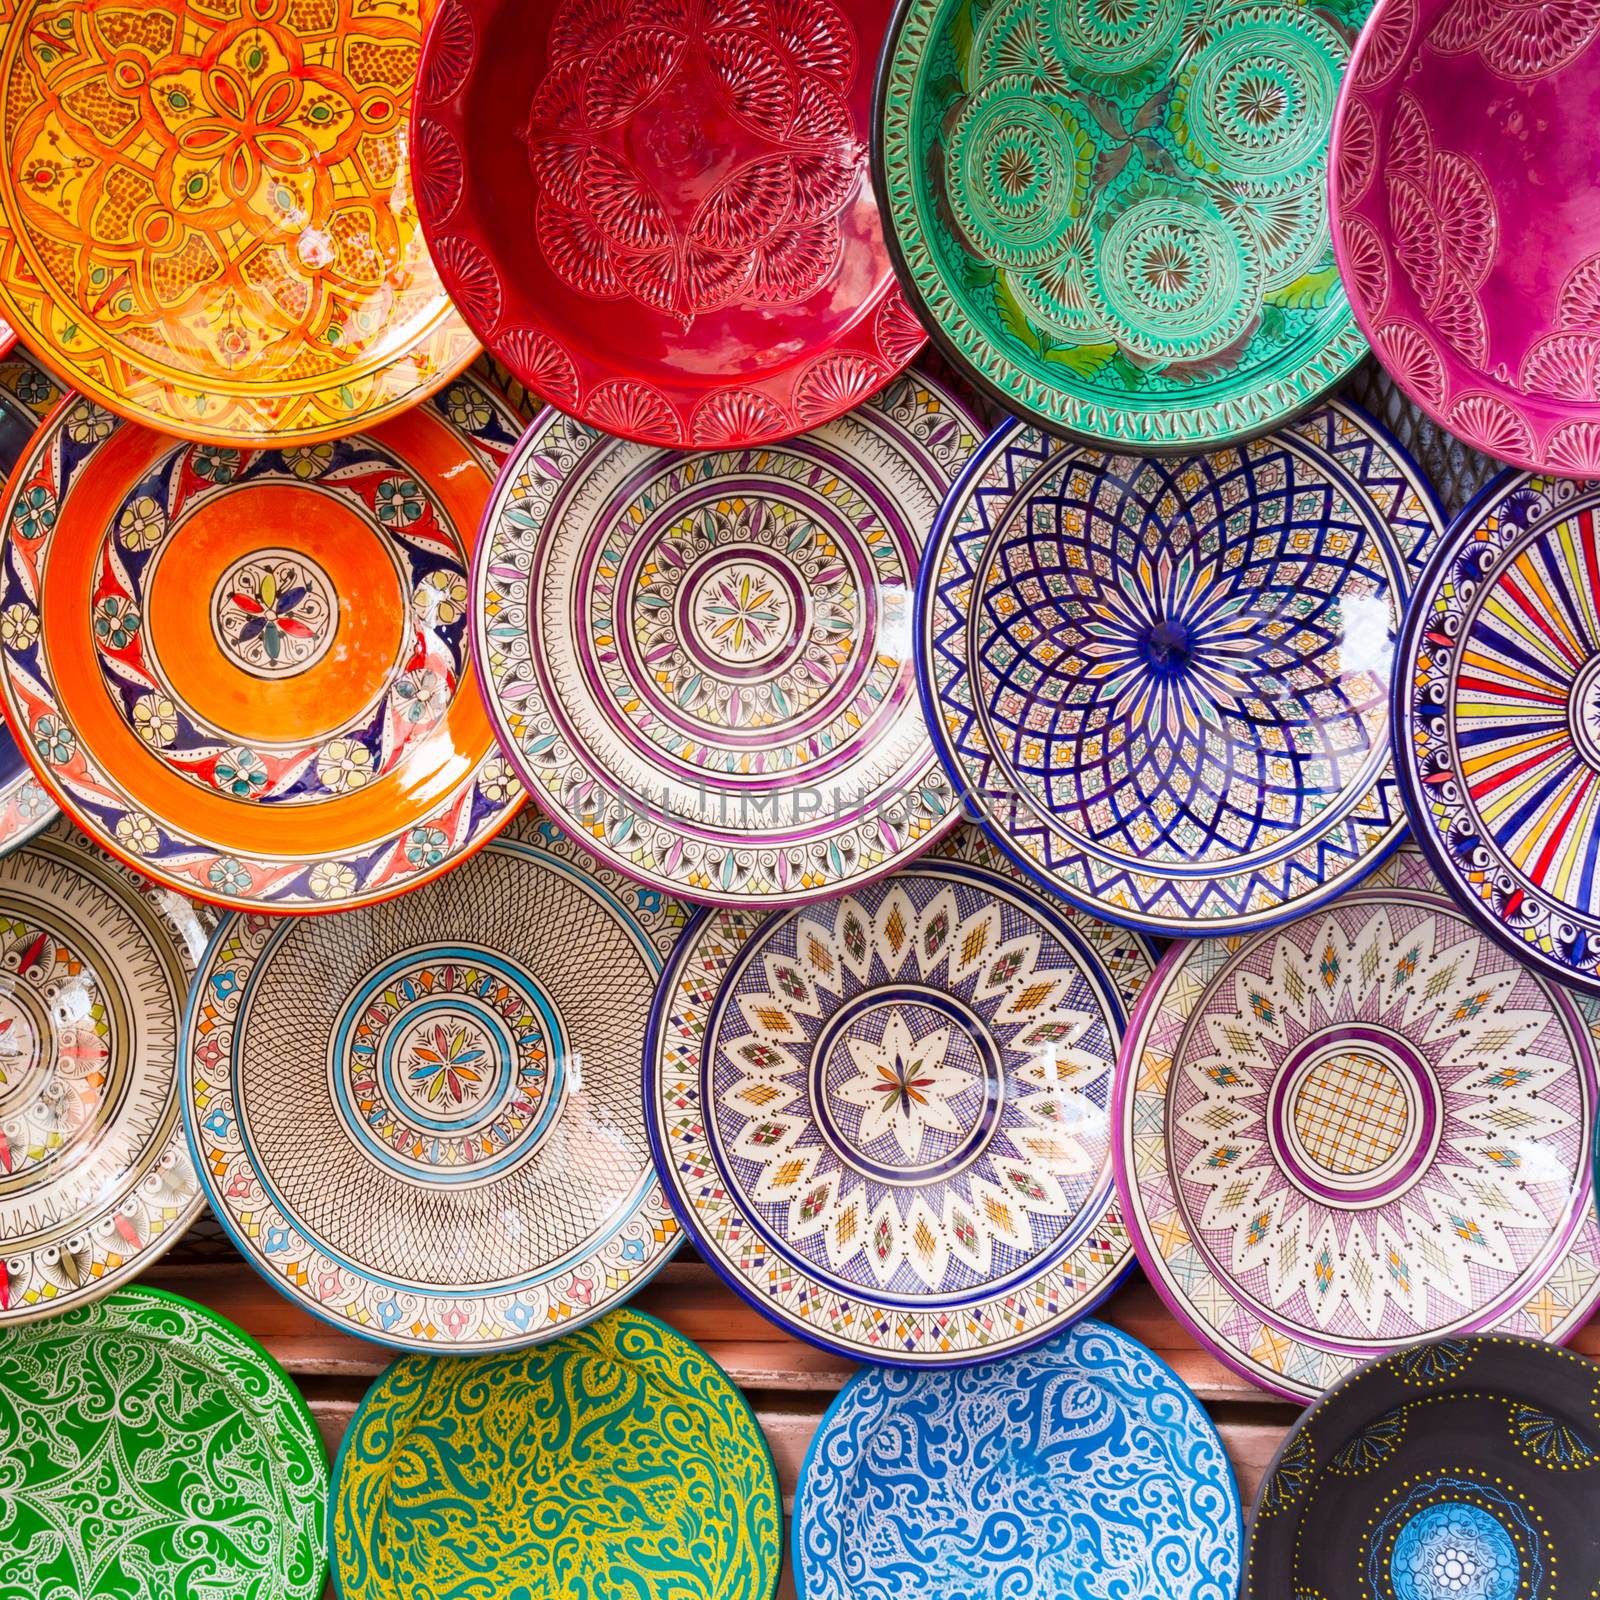 Traditional arabic handcrafted, colorful decorated plates shot at the market in Marrakesh, Morocco, Africa.